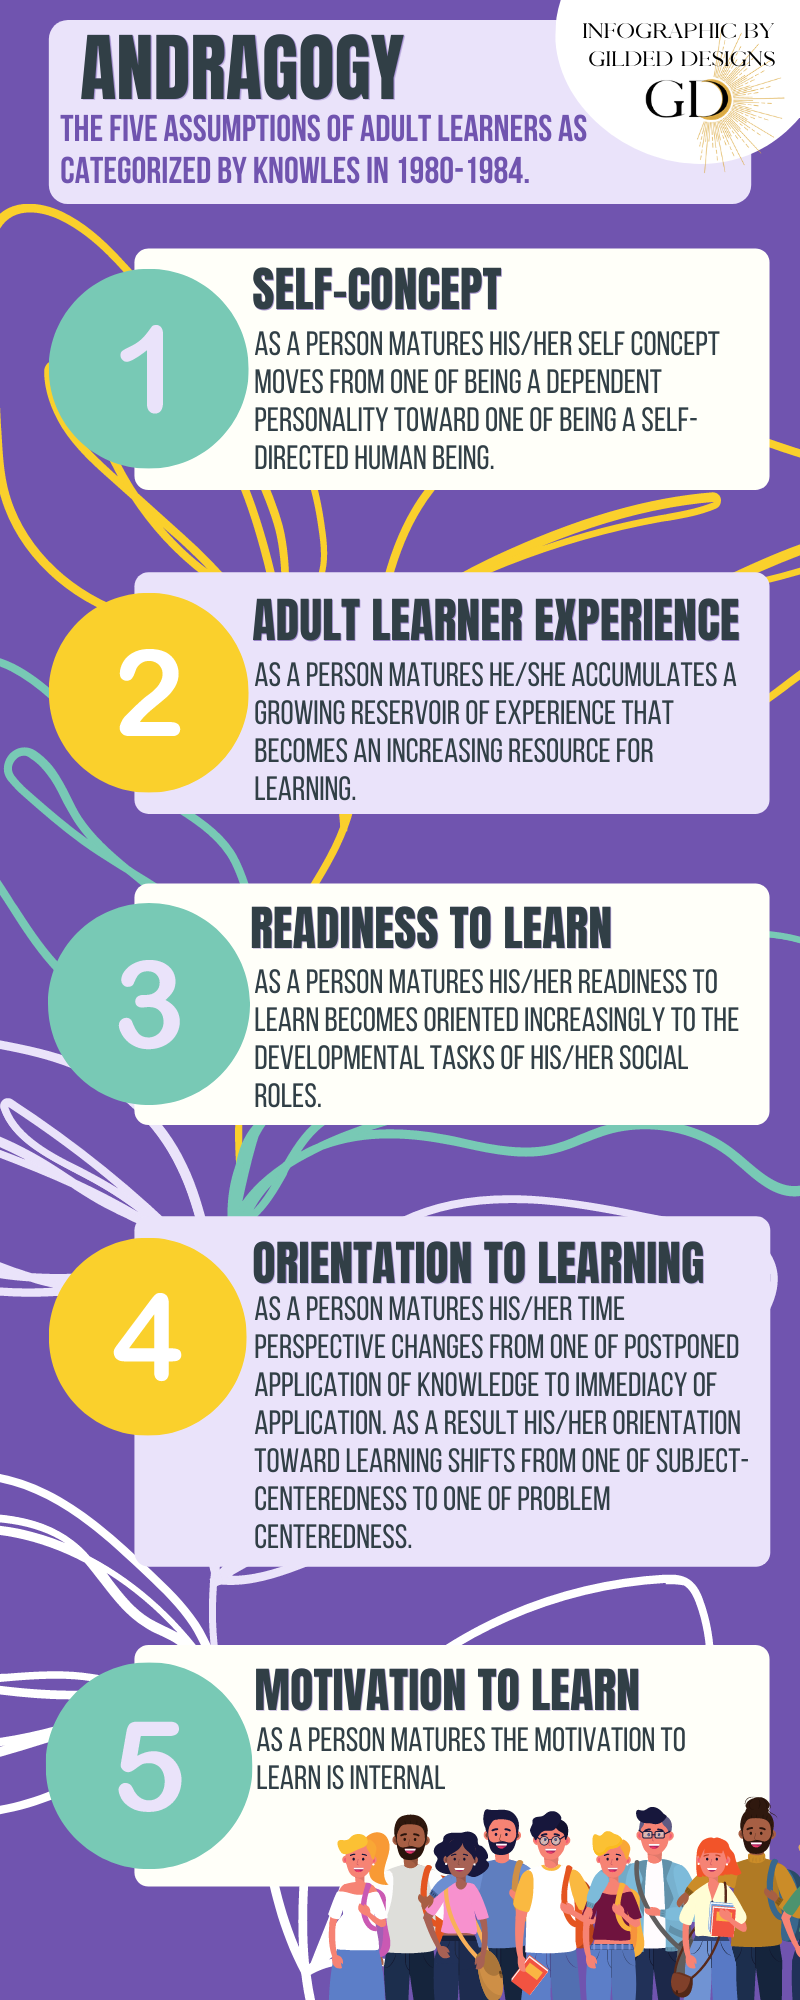 This is an infographic on Andragogy